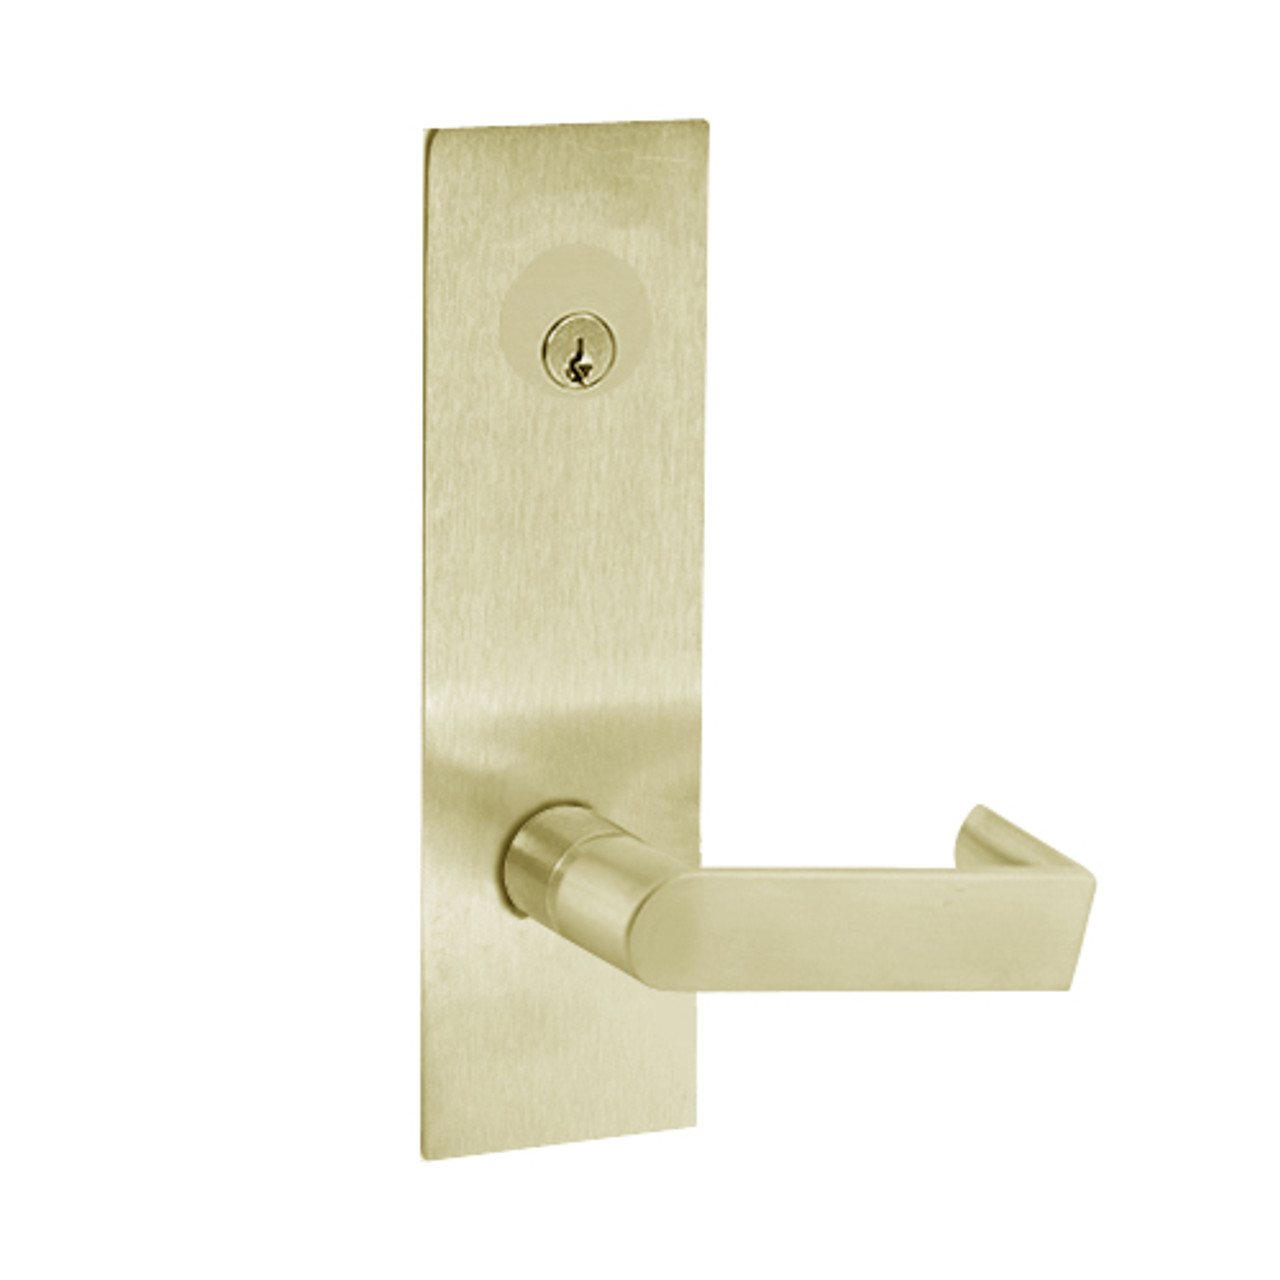 Z7850LRDEE SDC Z7800 Selectric Pro Series Locked Outside Sides Failsafe Electric Mortise Lock with Eclipse Lever in Satin Brass